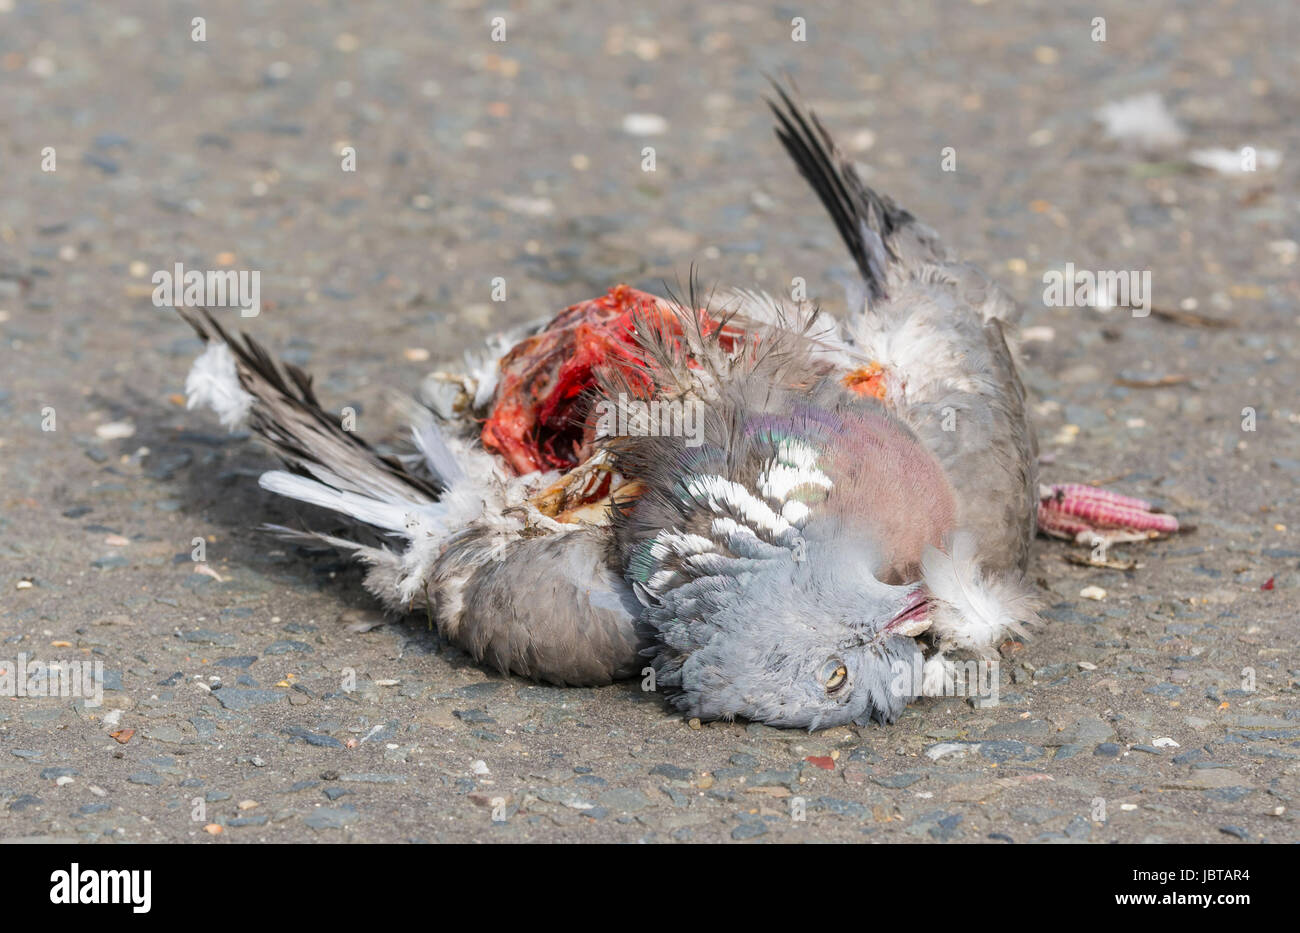 Roadkill. Wood Pigeon laying dead after being hit by a car on a road. Stock Photo